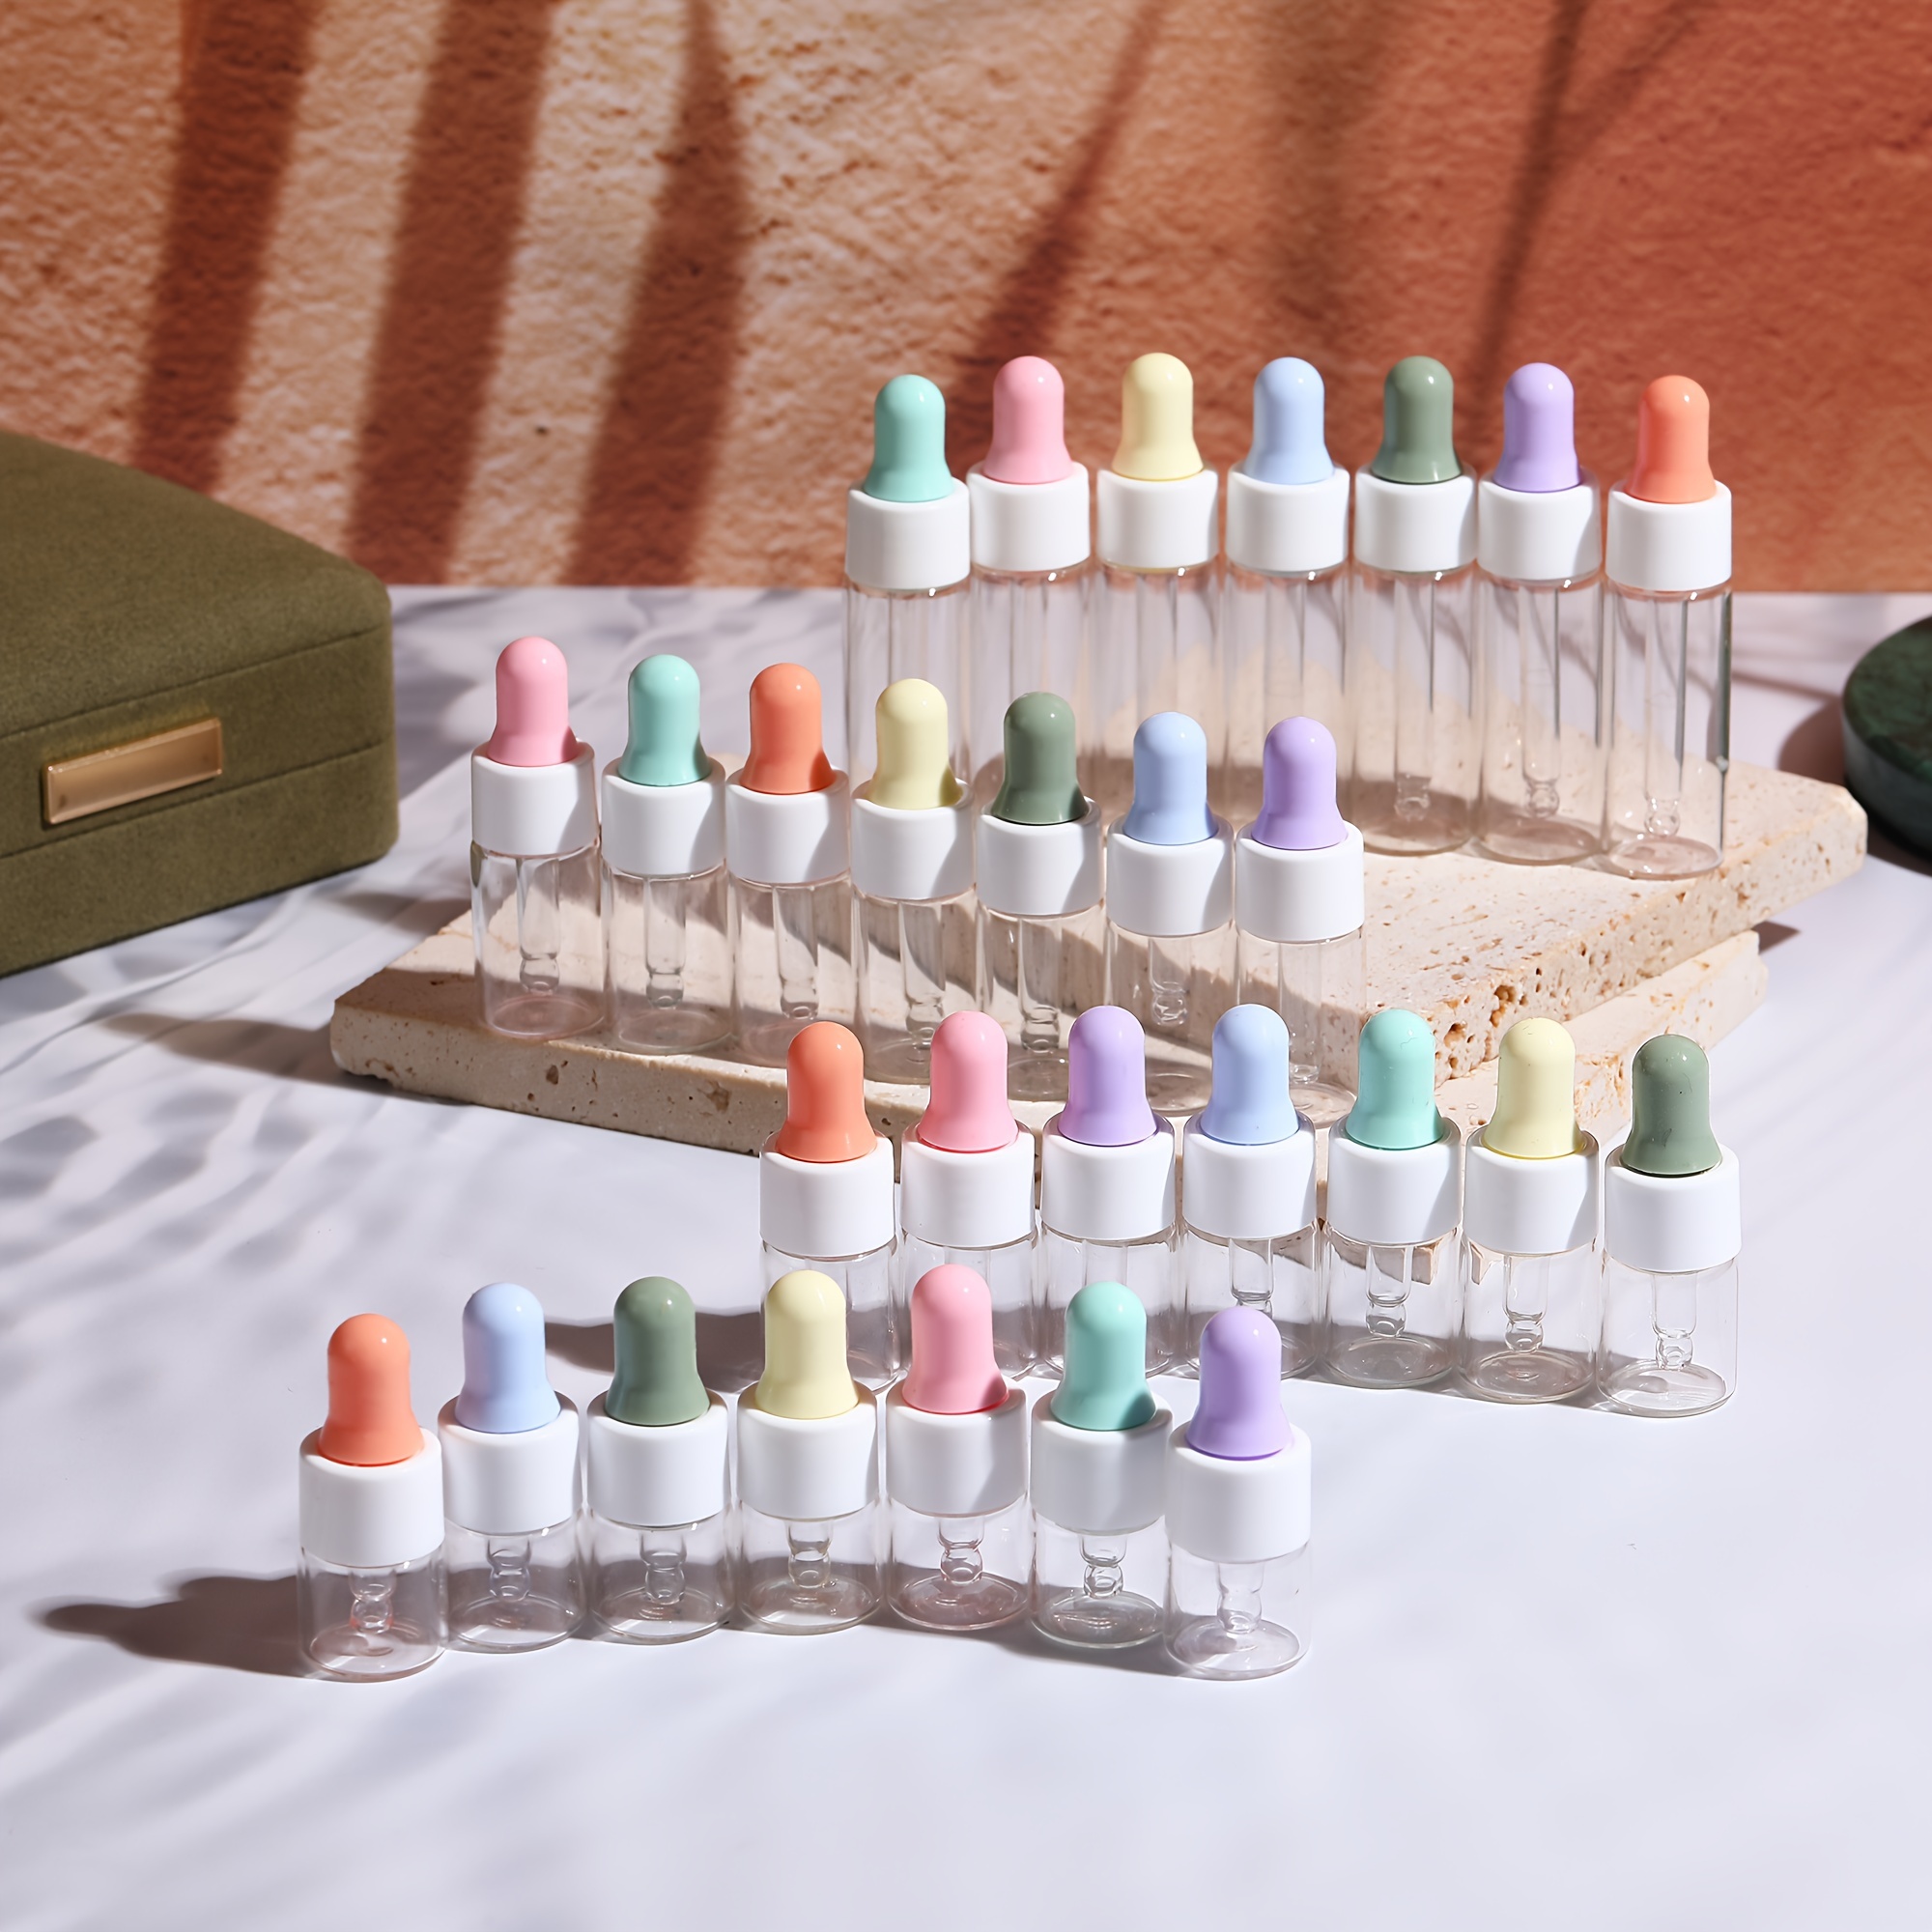 

28pcs Mini Dropper Bottles, Transparent Glass Essential Oil Vials With Colorful Silicone Caps, Sample Size Dispensers For Aromatherapy And Perfumes